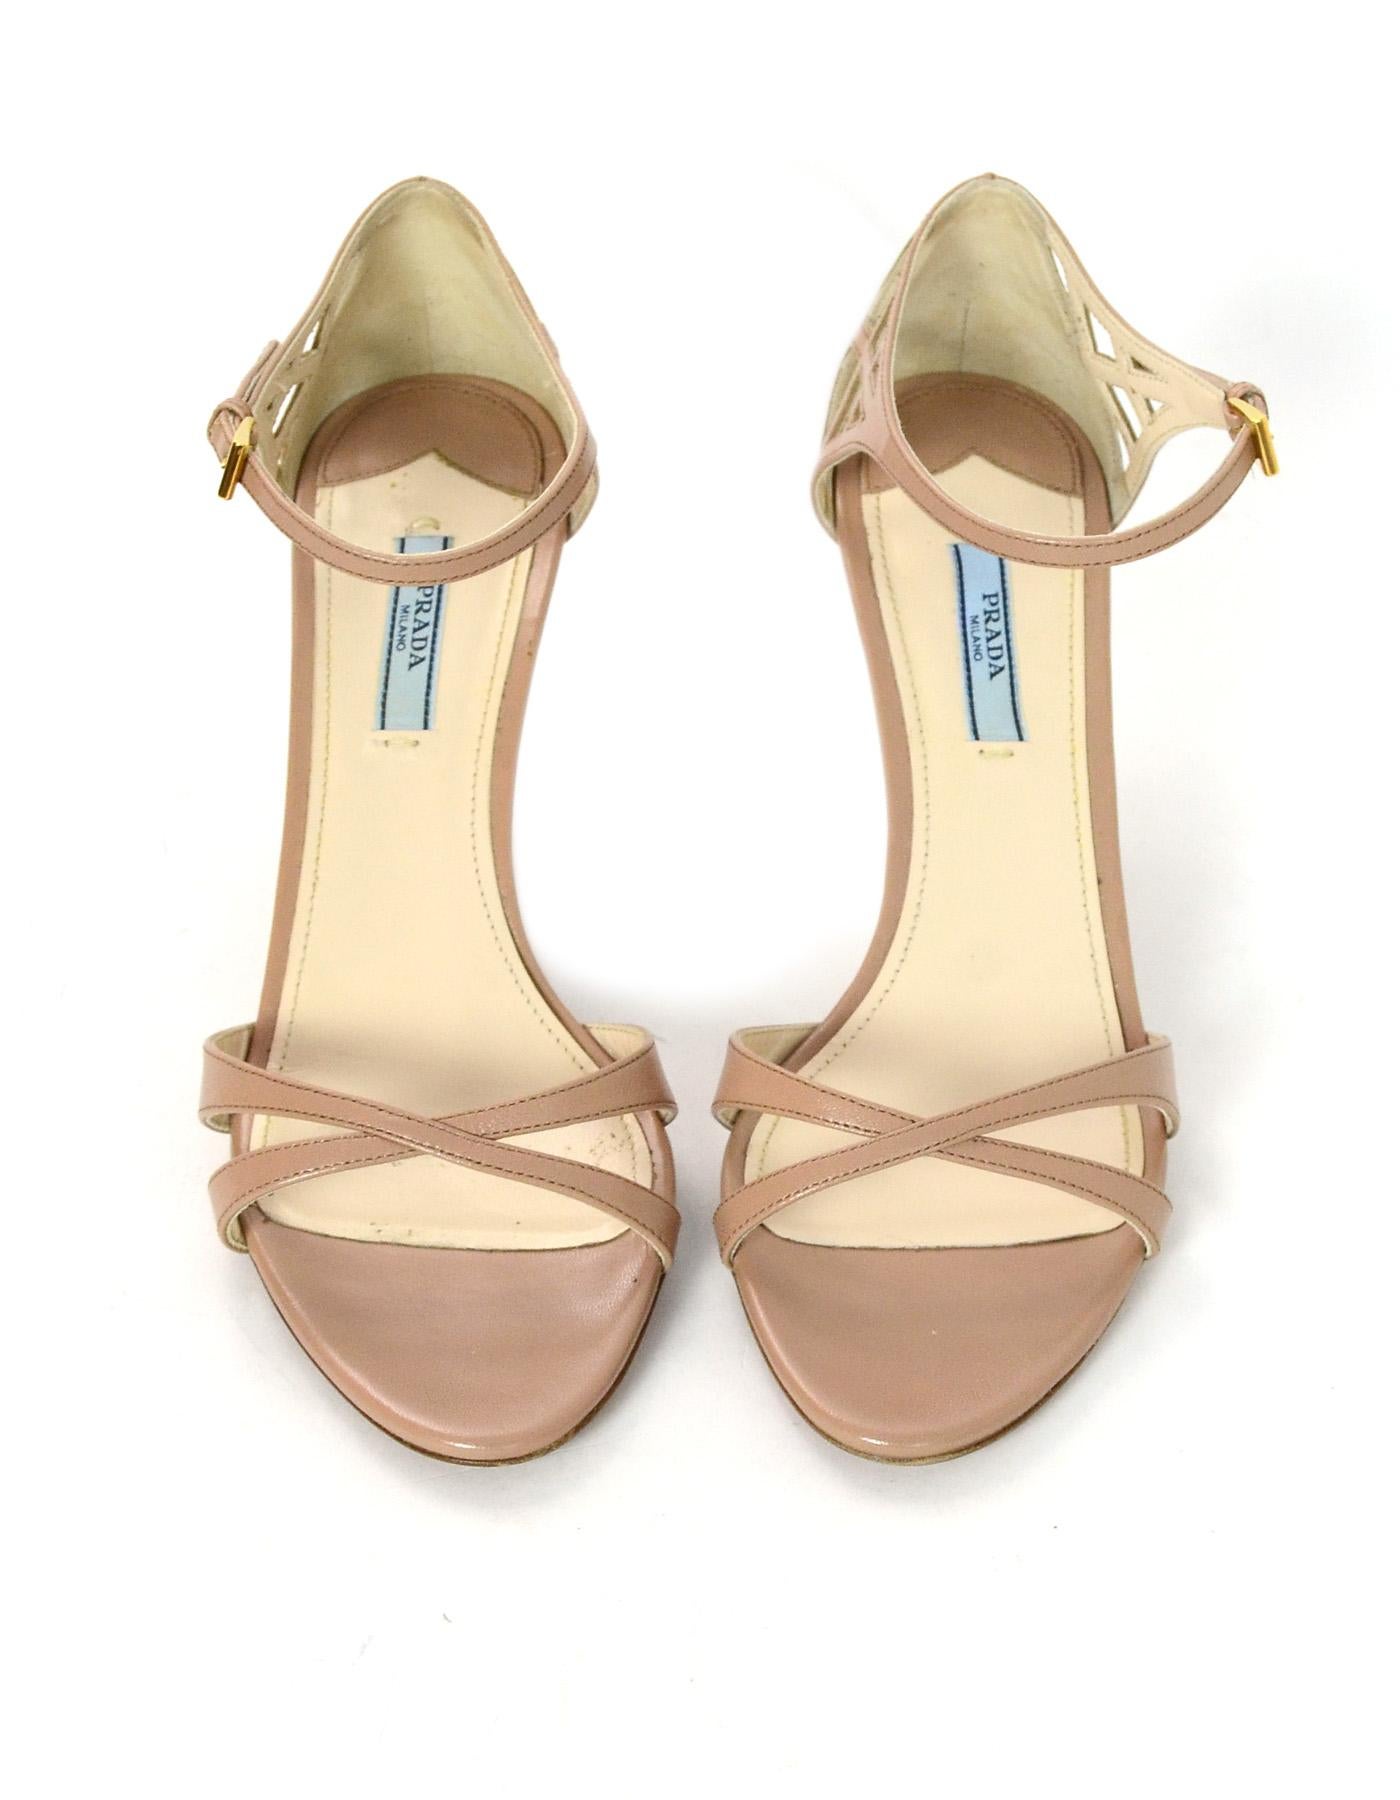 Prada Nude Leather Strappy High Heel Sandals Sz 40.5 W/ Box & Dust Bag In Excellent Condition In New York, NY